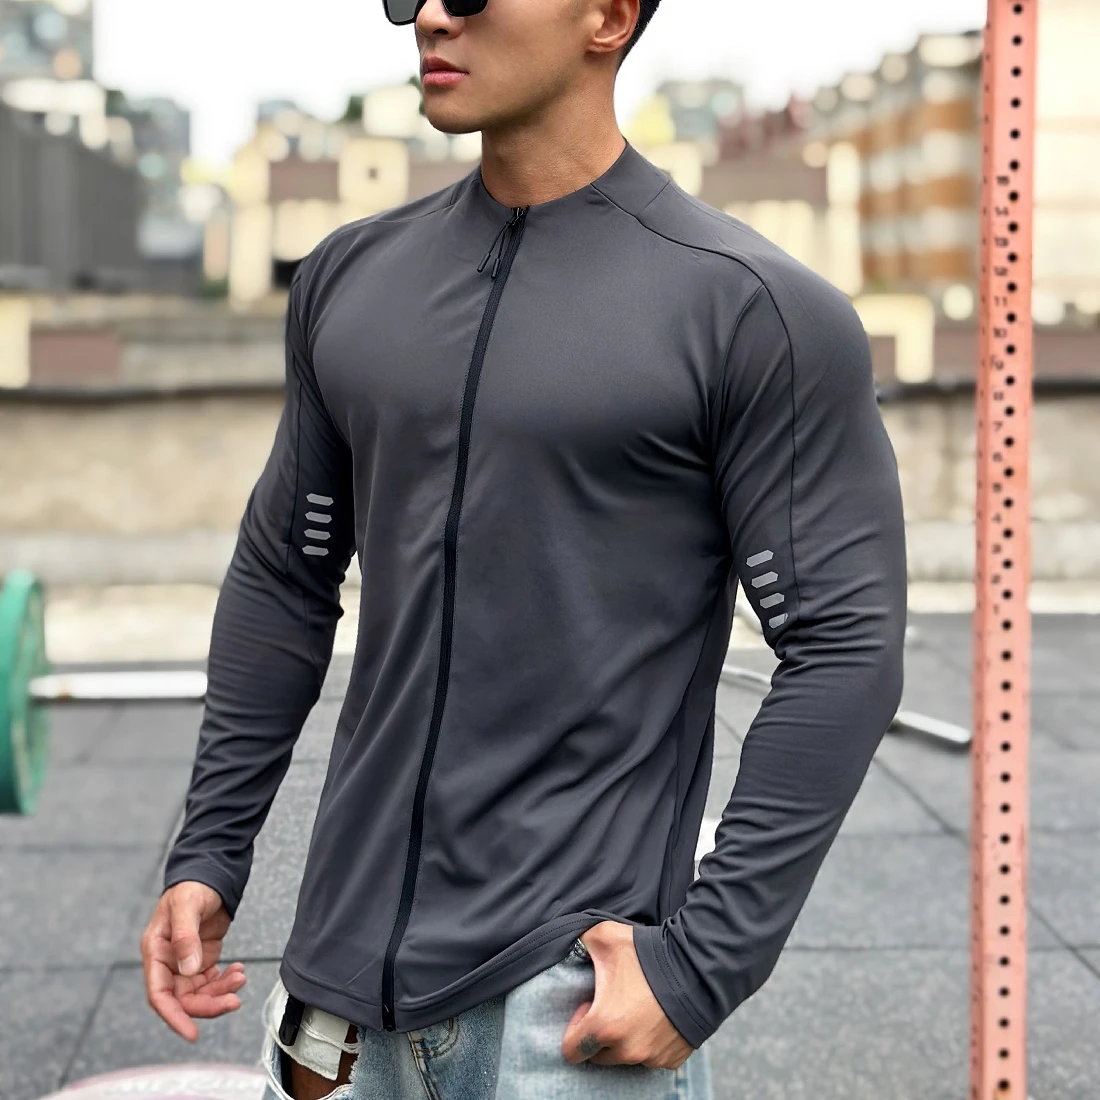 New Autumn Men Jacket Stand Neck Quick Dried Long Sleeve Coat Slim Fit Casual Sportswear Workout Outdoorwear